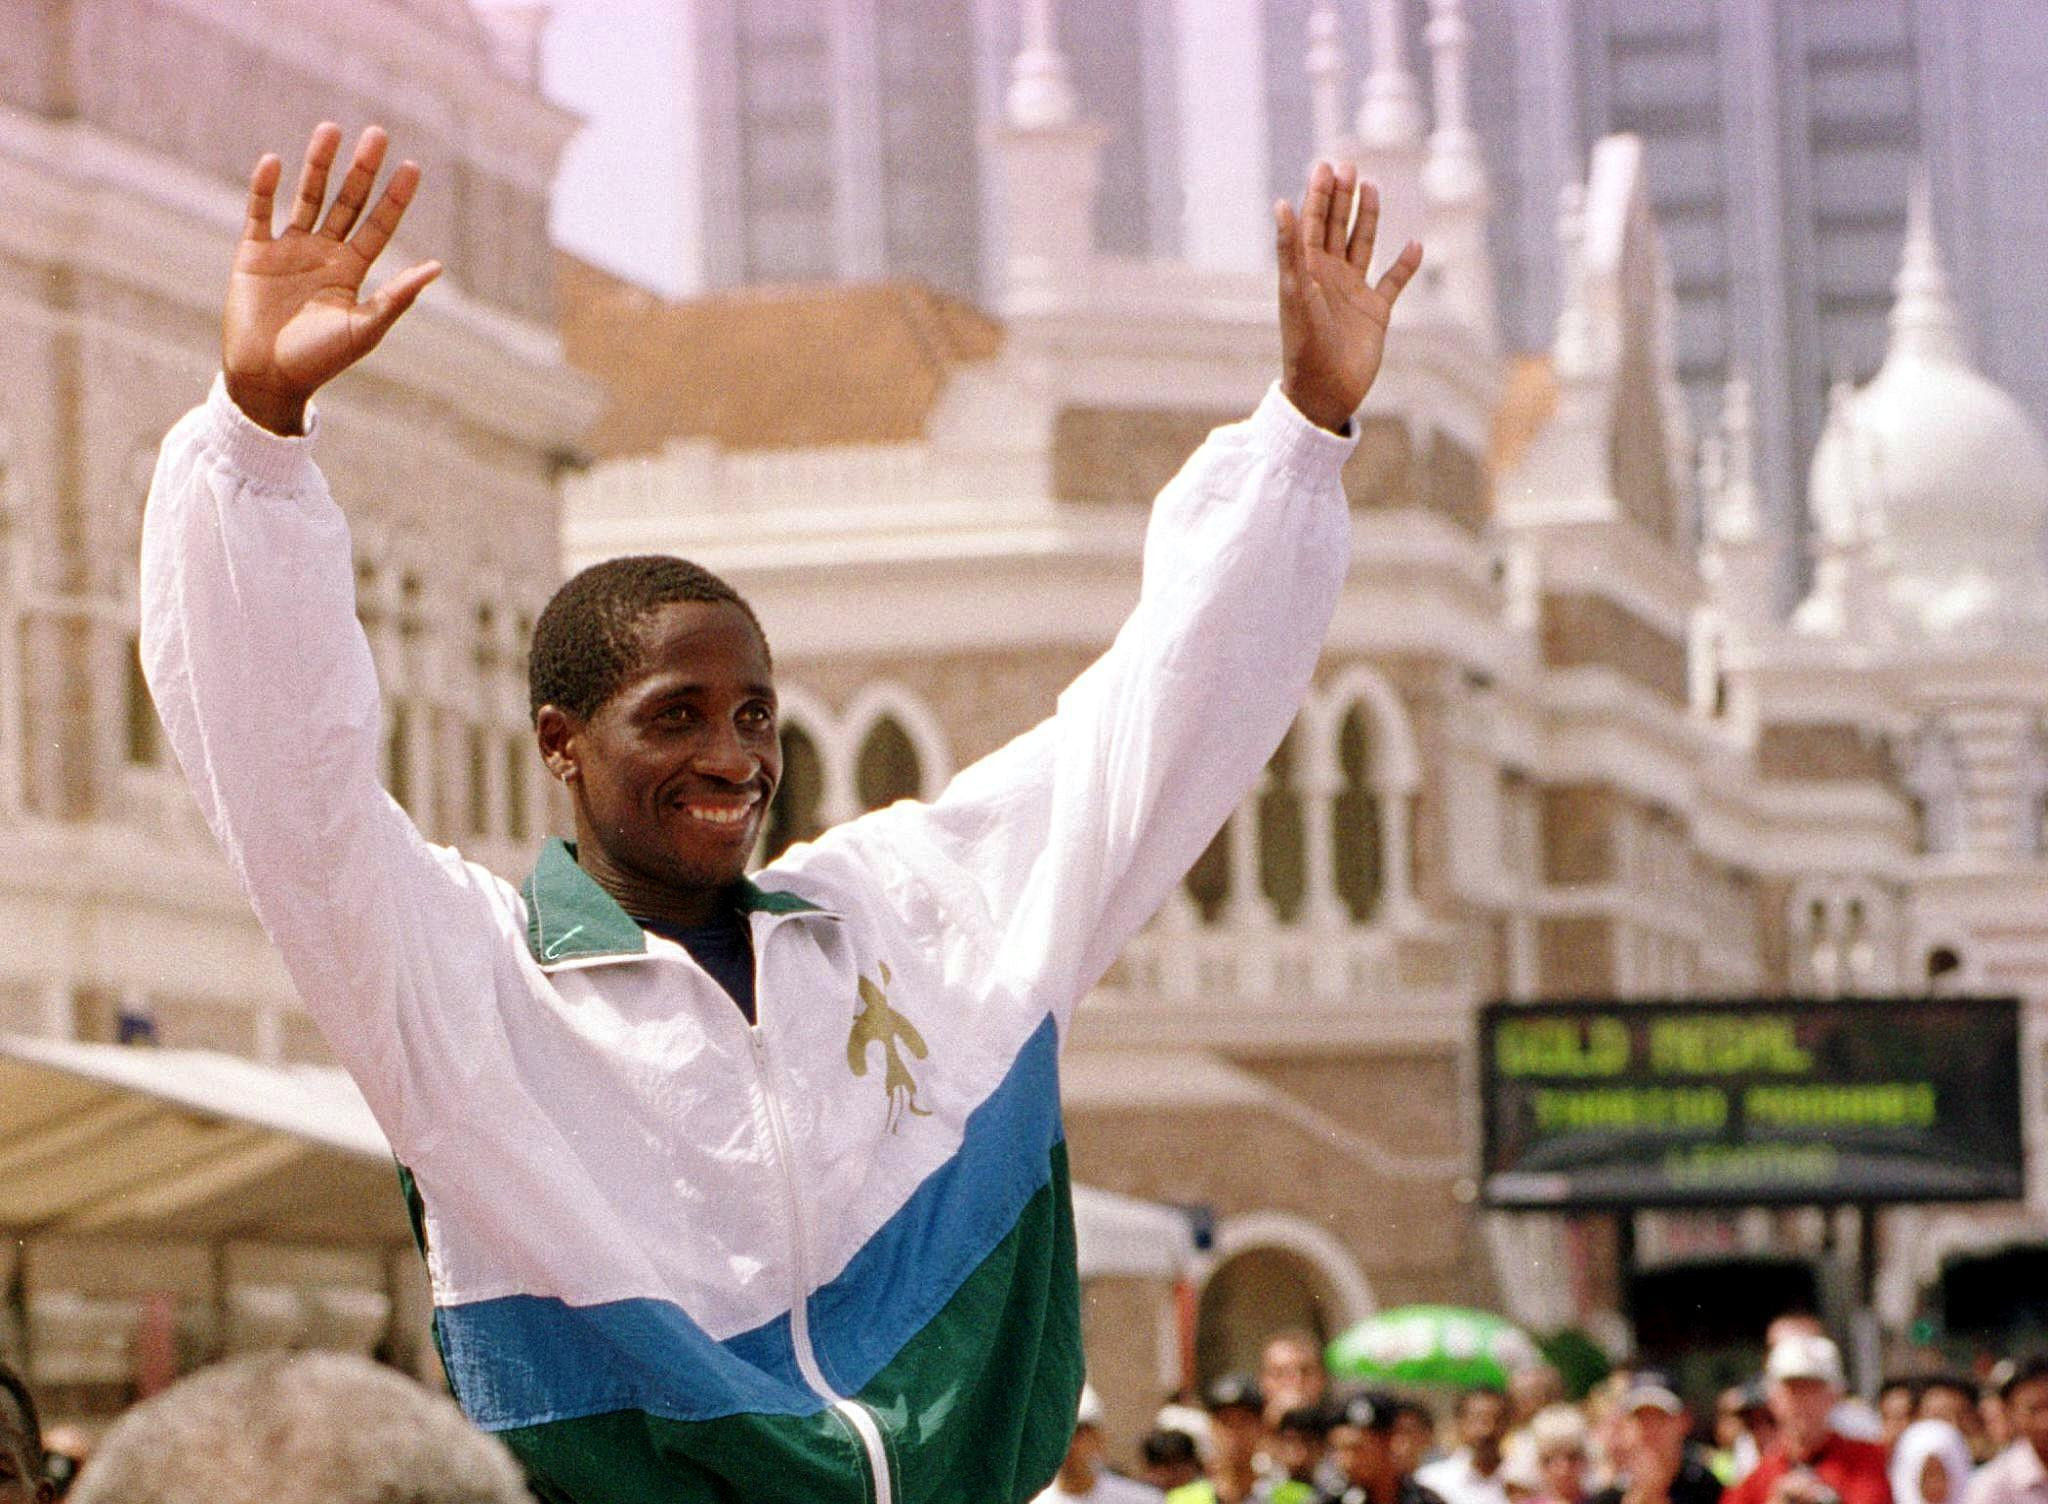 Thabiso Moqhali won Lesotho's only Commonwealth Games gold medal in the marathon at Kuala Lumpur 1998 ©Getty Images